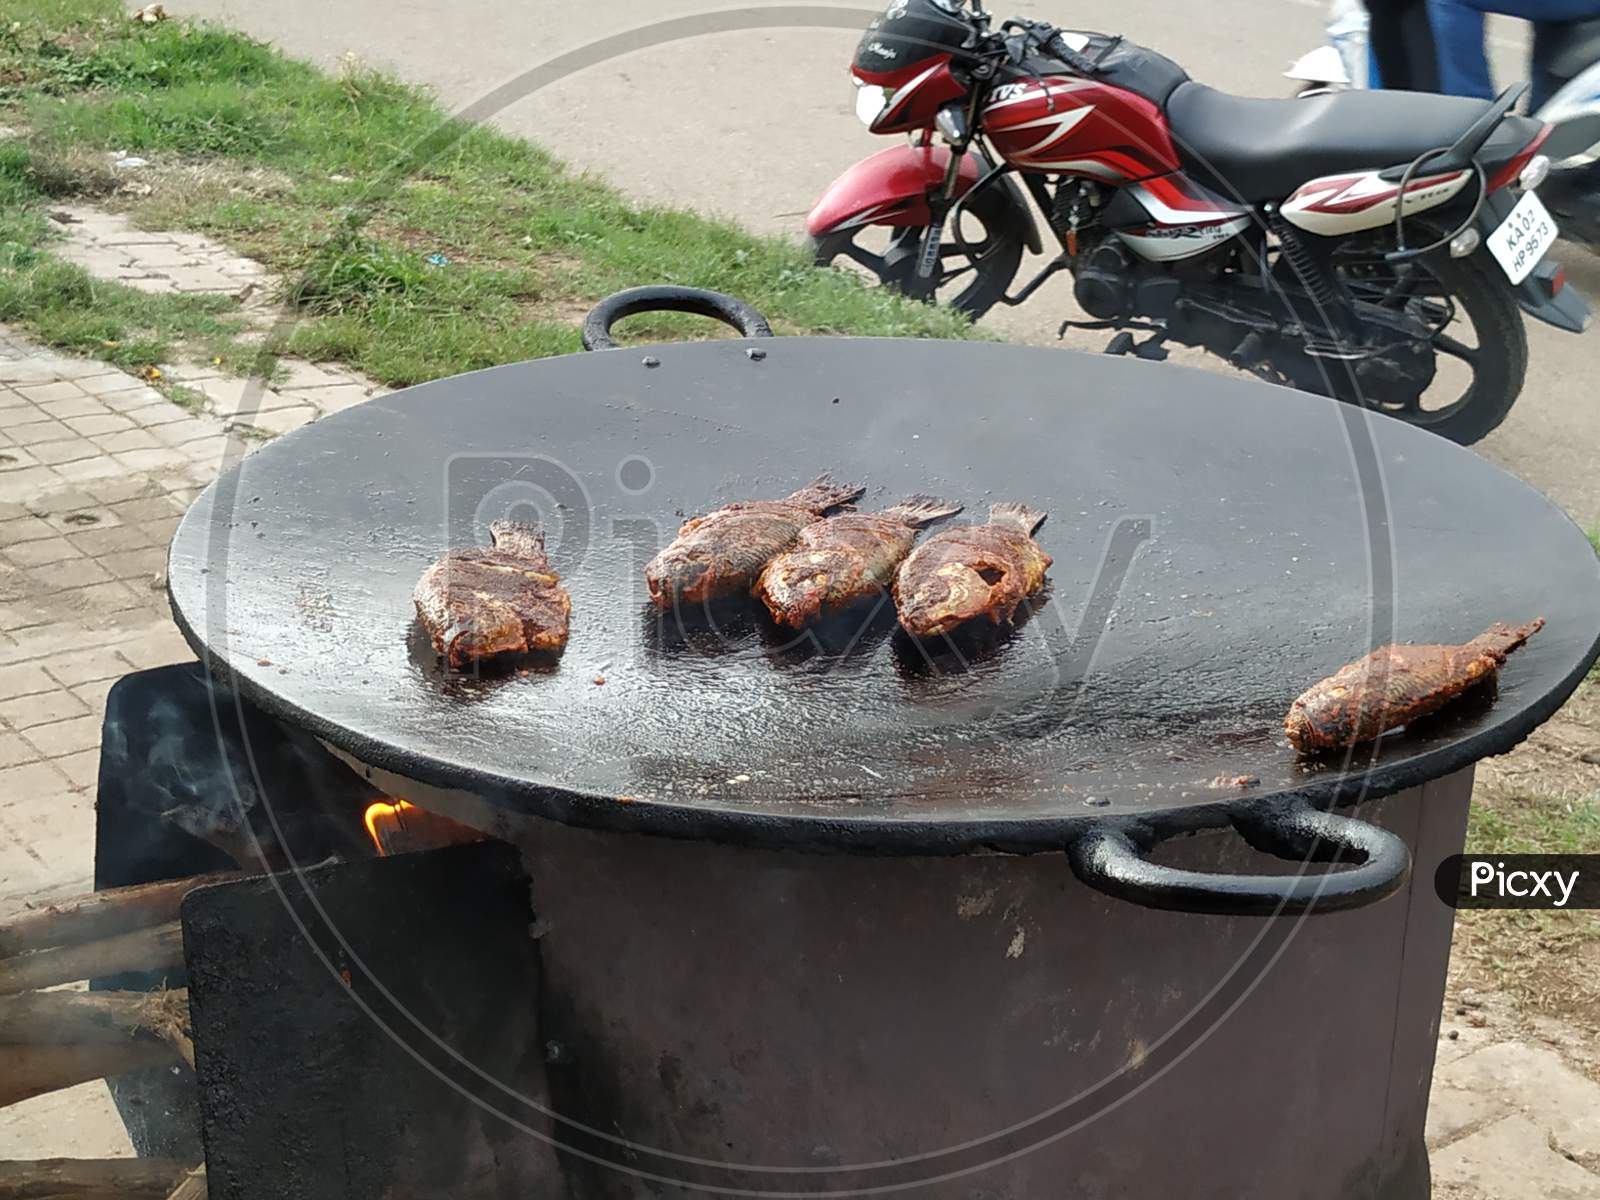 Fish Frying in a Tawa on Road Side of the Bangalore at Evening Time